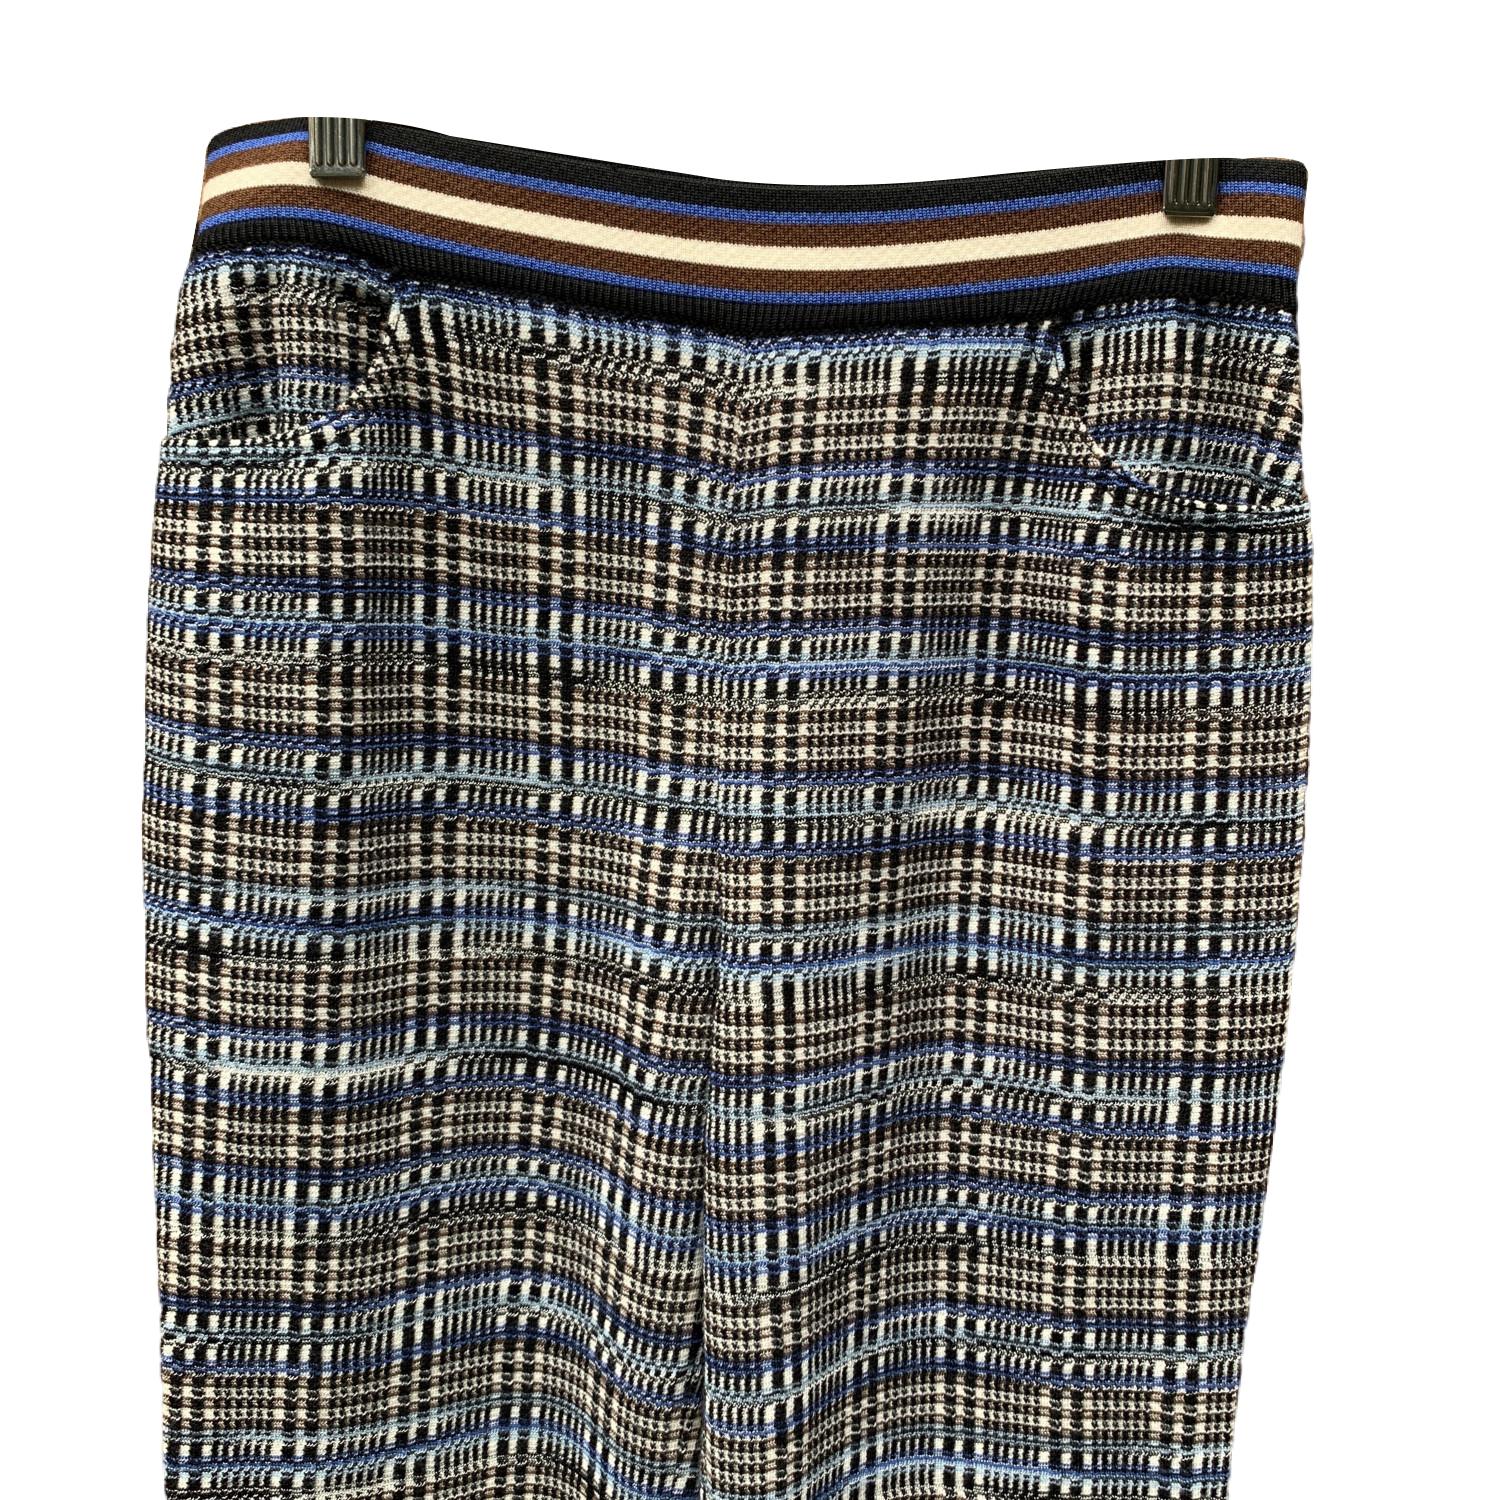 Missoni elastic pants with wide leg. It features an elastic waistline. Checkered pattern. Size: 42 IT (it should correspond to a SMALL size)

Details

MATERIAL: Canvas

COLOR: Blue

MODEL: -

GENDER: Women

COUNTRY OF MANUFACTURE: Italy

OCCASION: